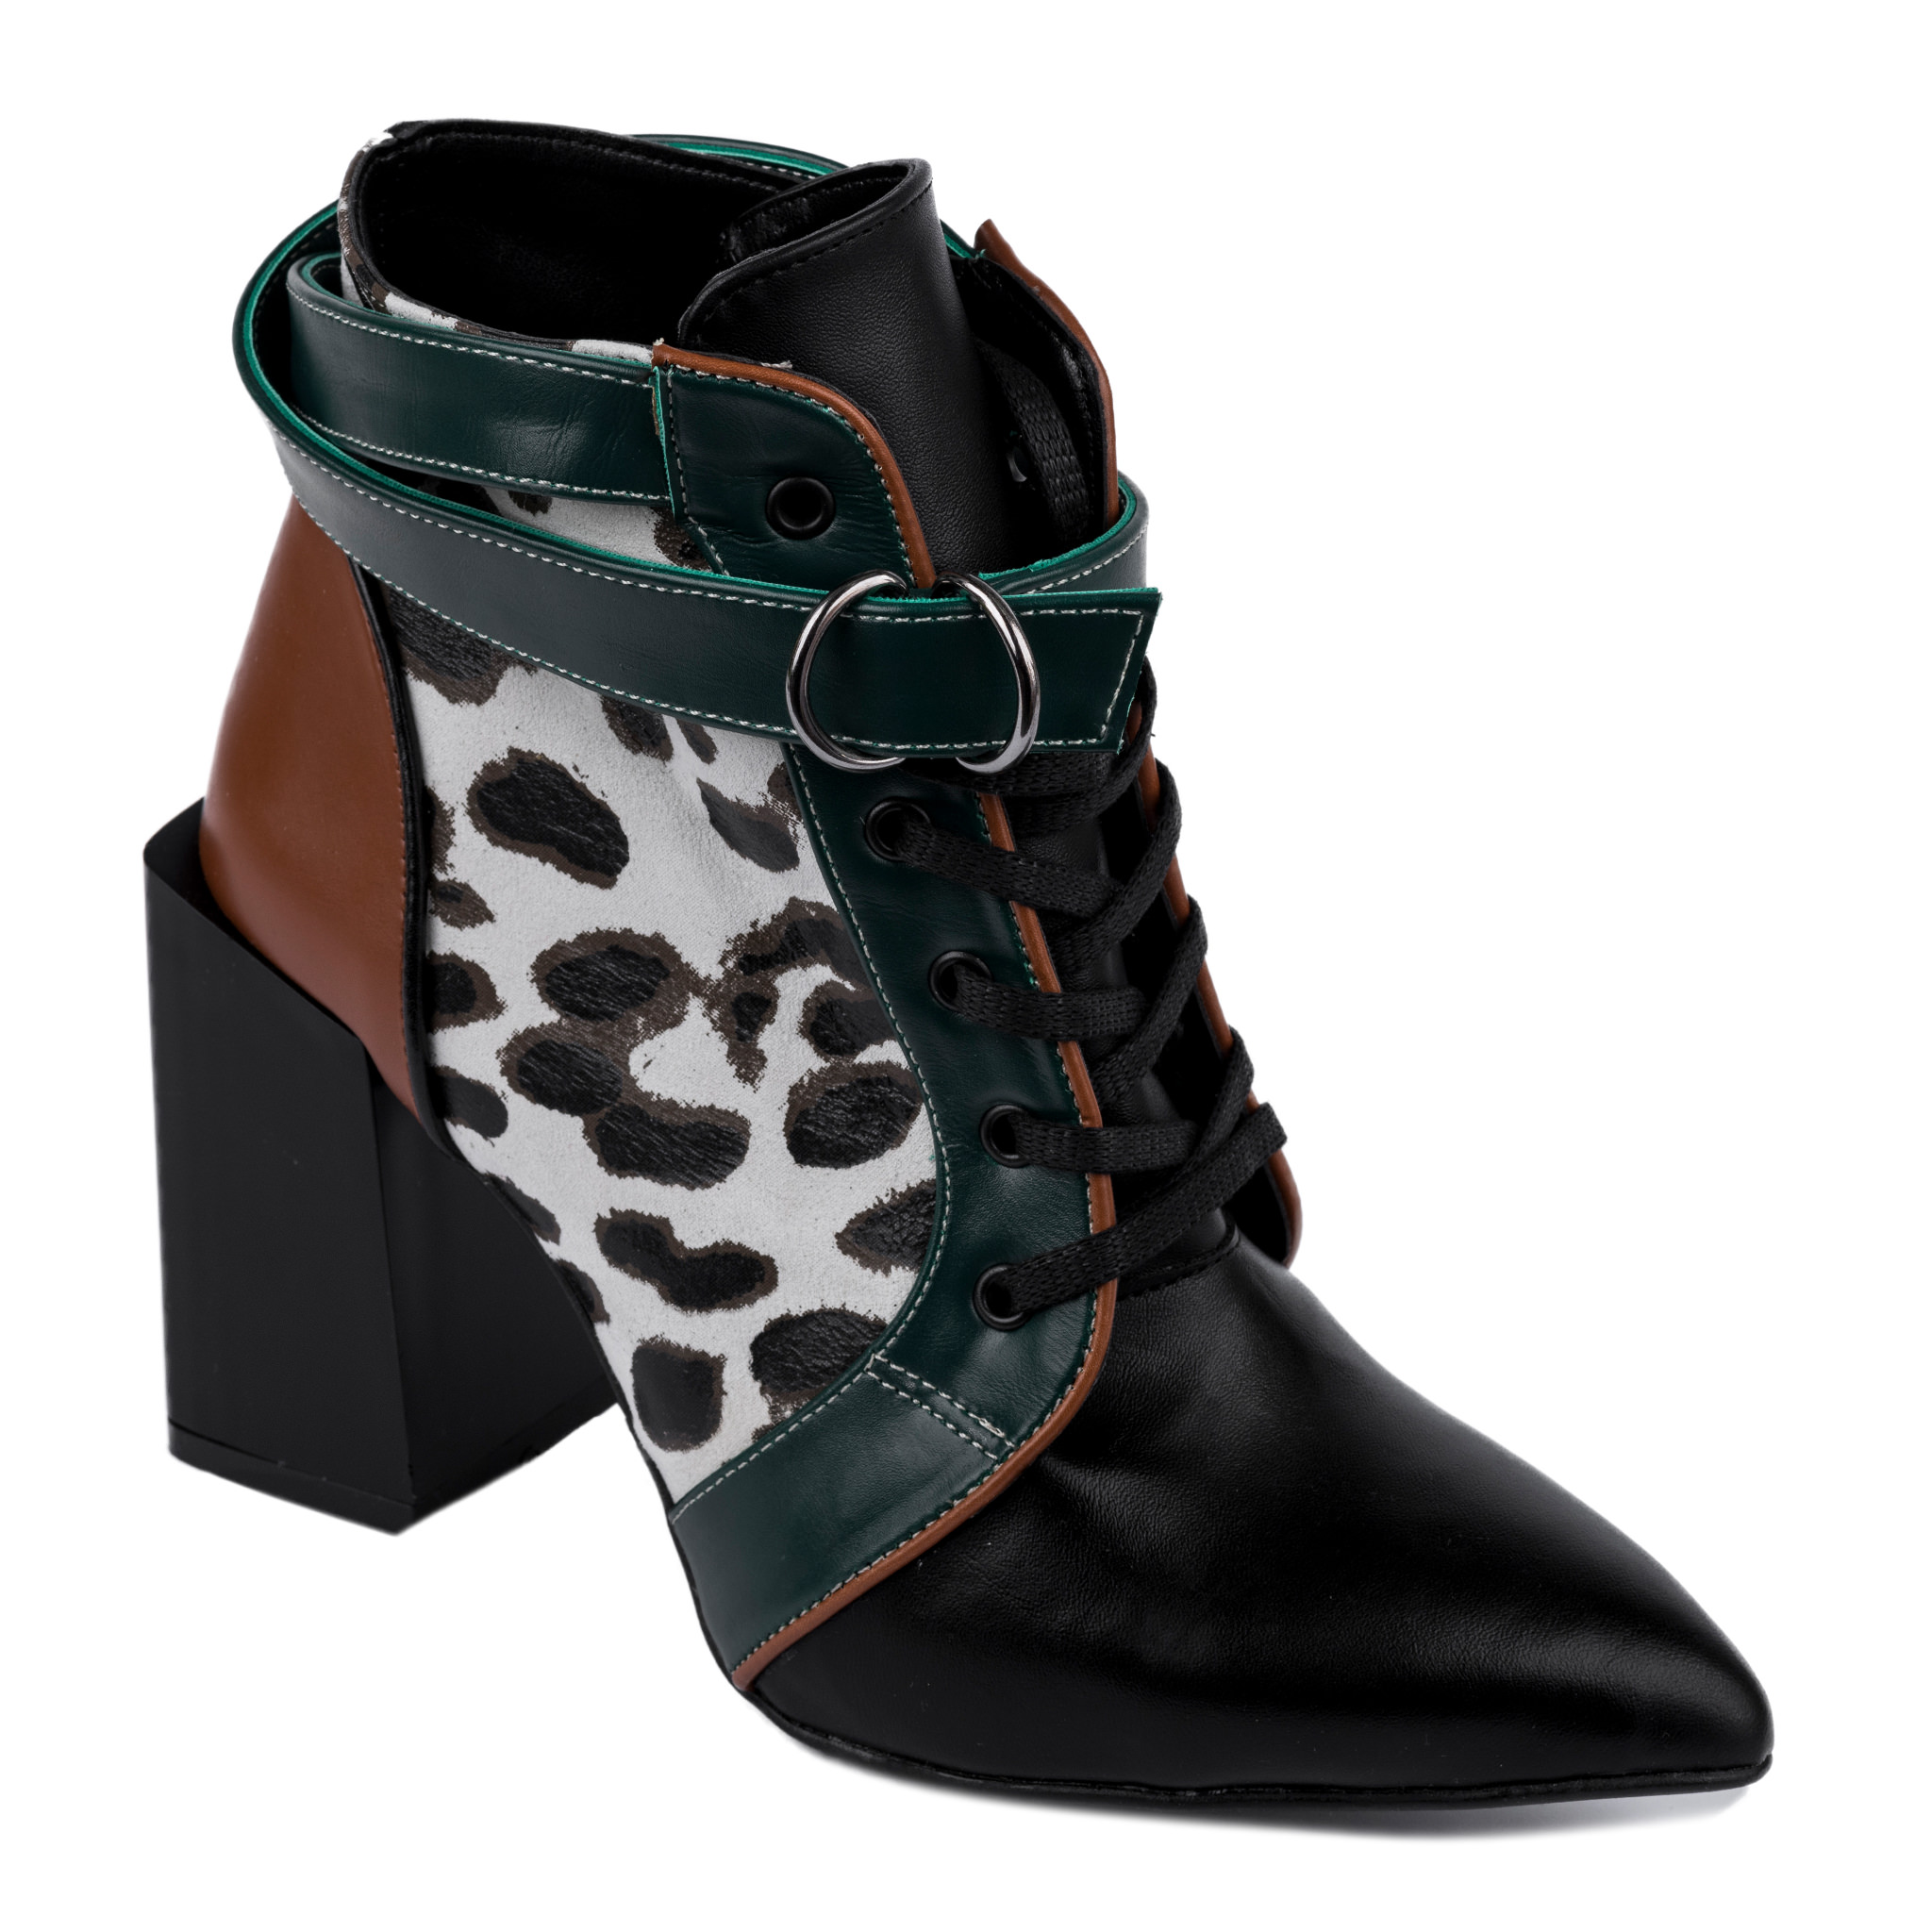 THICK HEEL ANKLE BOOTS WITH LEOPARD PRINT - BLACK